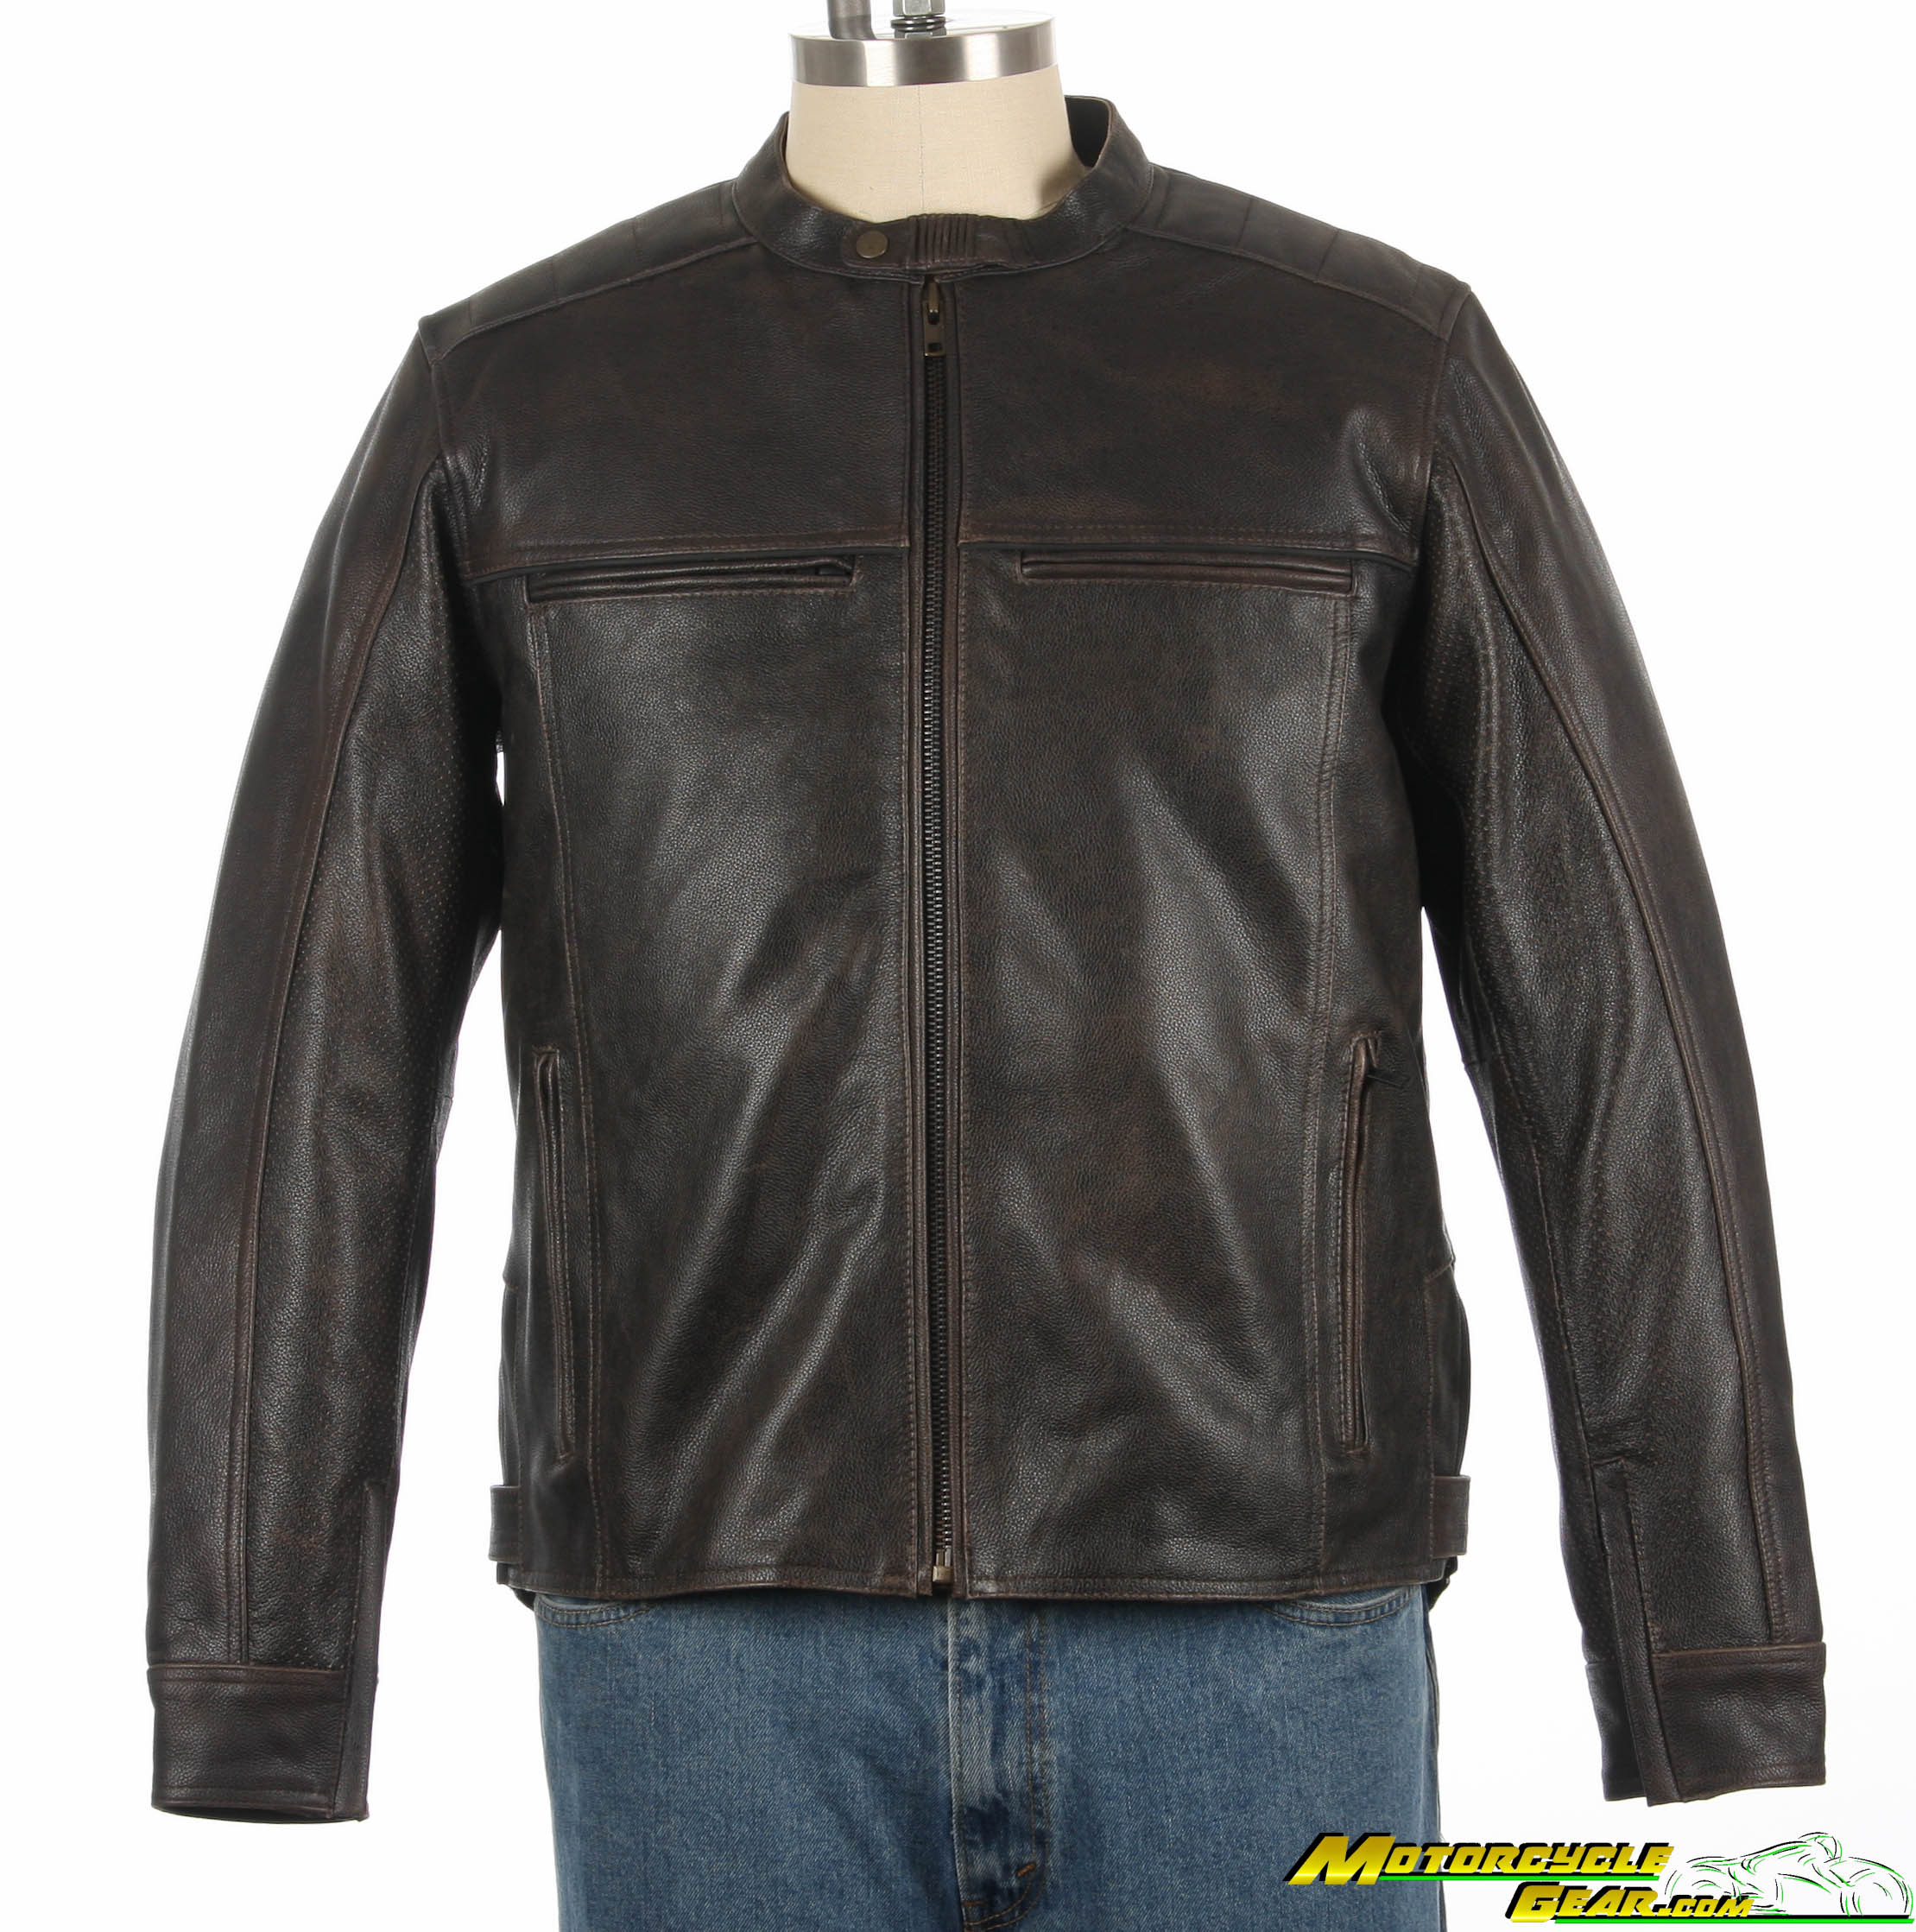 Viewing Images For Z1R Indiana Leather Jacket :: MotorcycleGear.com